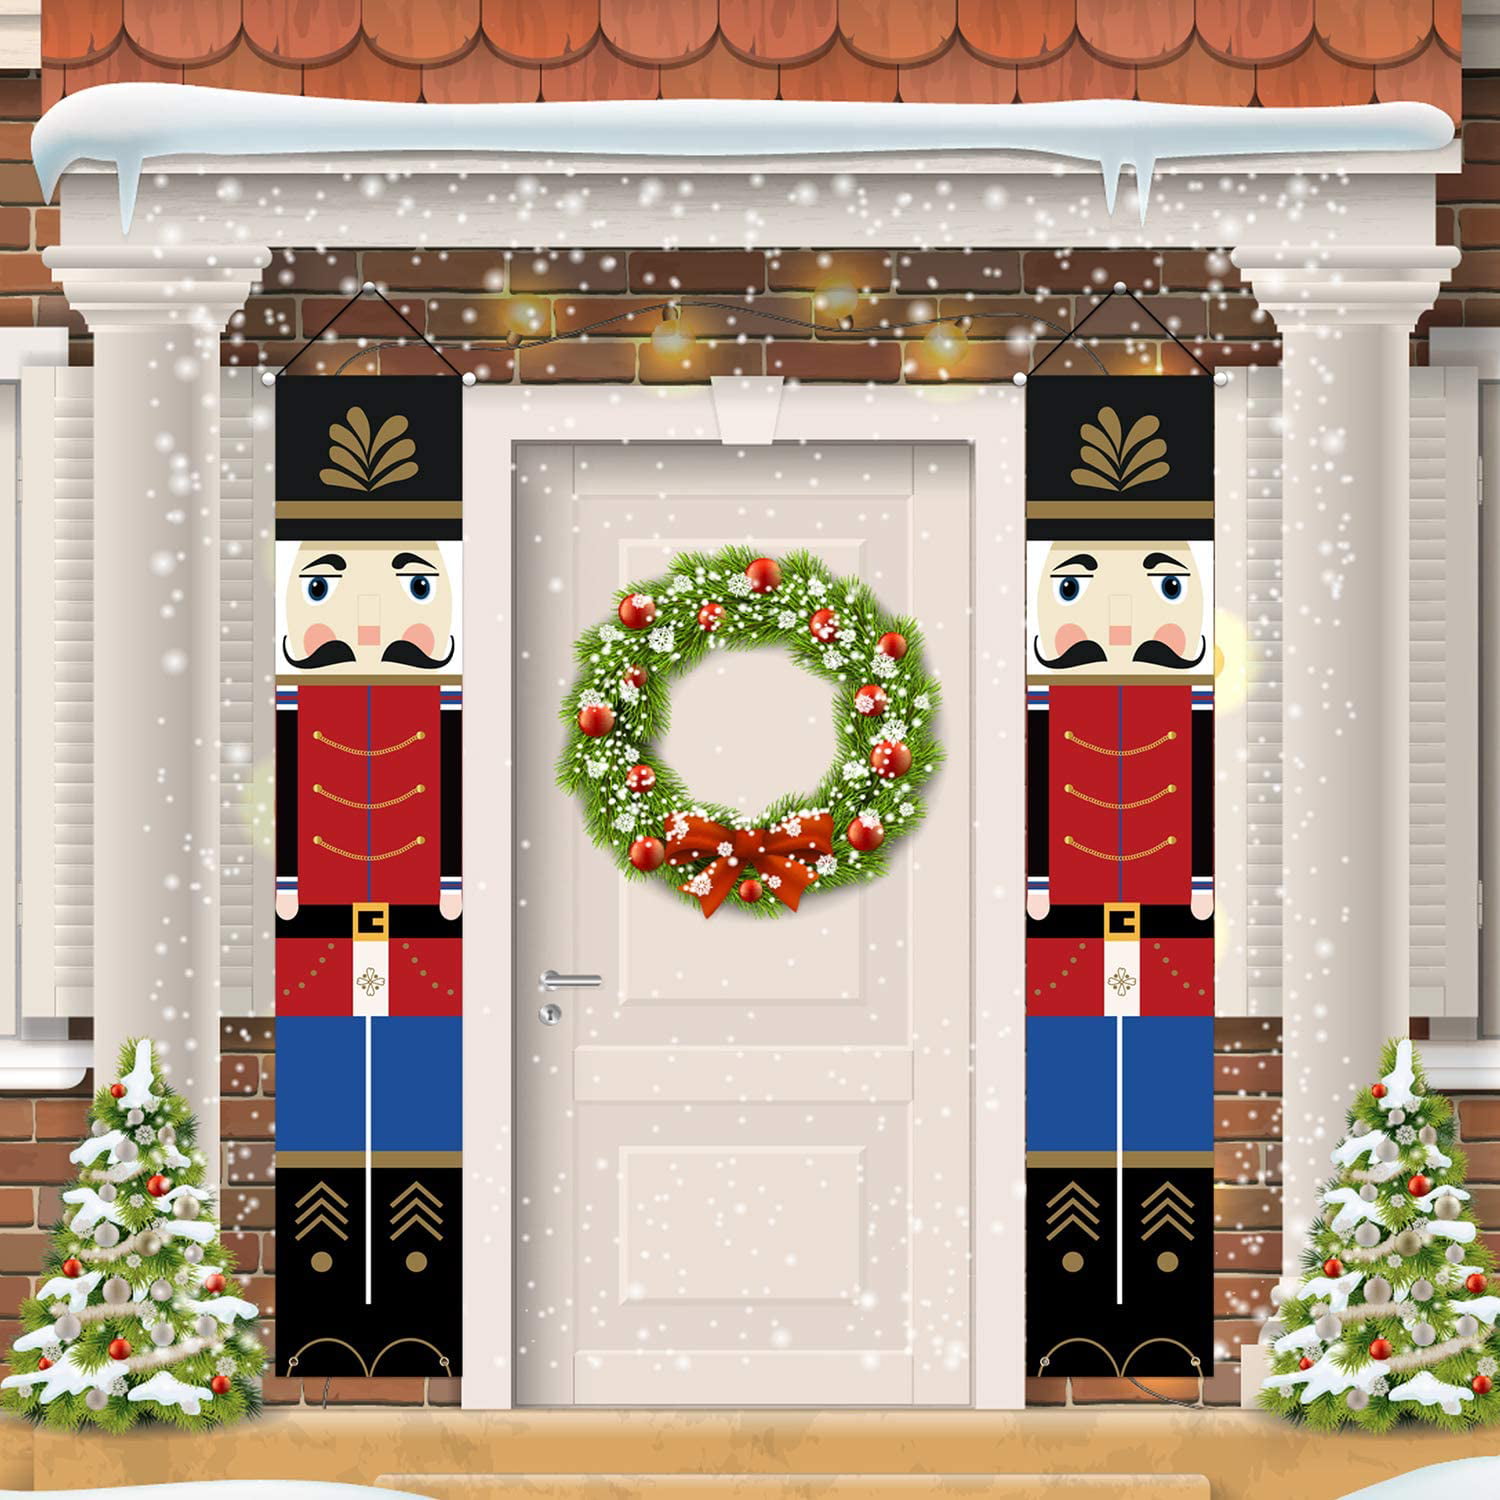 Details about   Nutcracker Banners Holiday Soldier Figures Door Decor Yard Ornaments Home Decor 